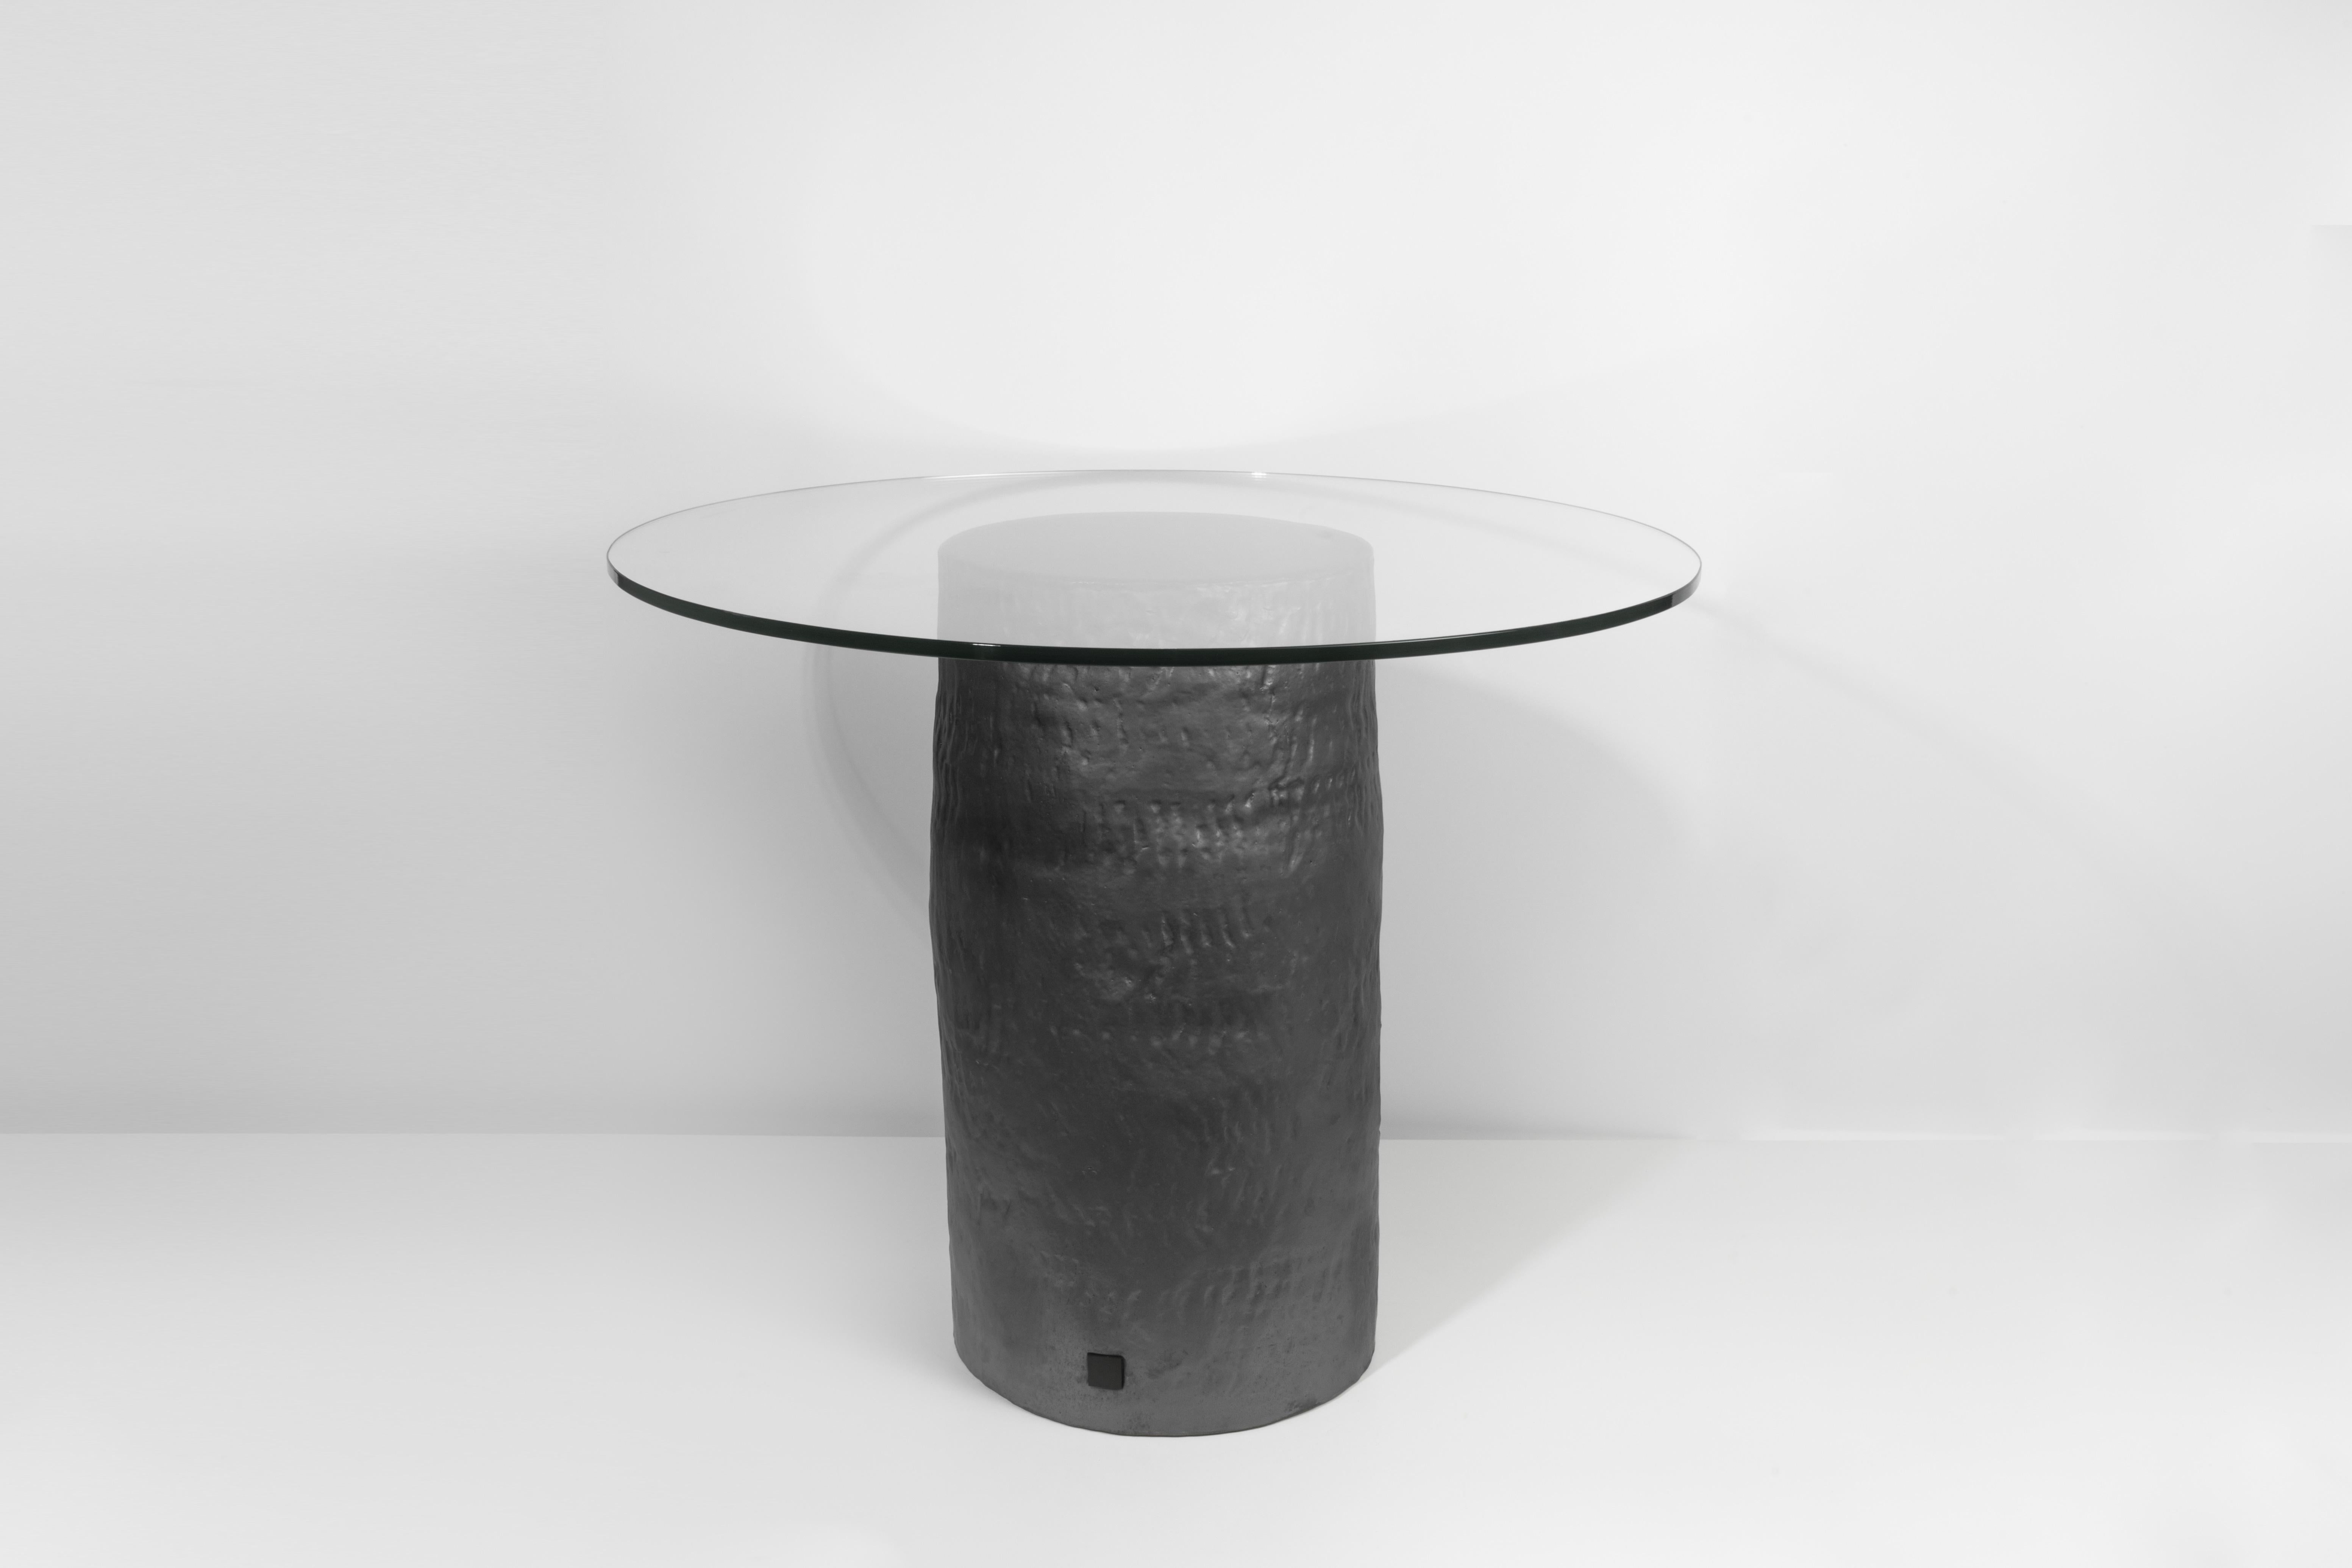 Coil-built ceramic table with black coppered glaze and glass top. Marked with an engraved bronze label to underside: Jonathan Nesci w/ Robert Pulley 18/20. Unique work and form from a closed collection of 20 designs. 

Designed by Jonathan Nesci and